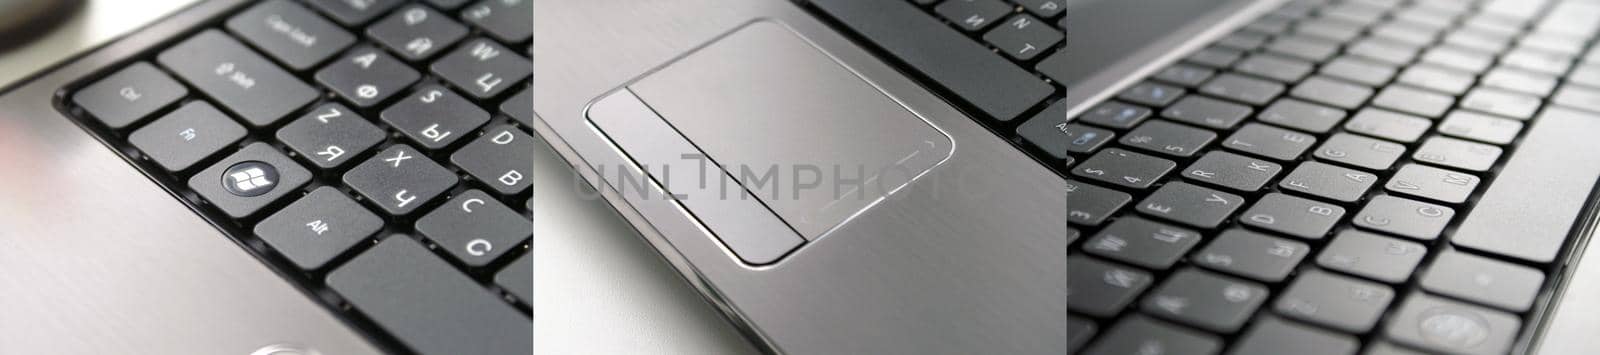 Clean new gray laptop with russian keyboard